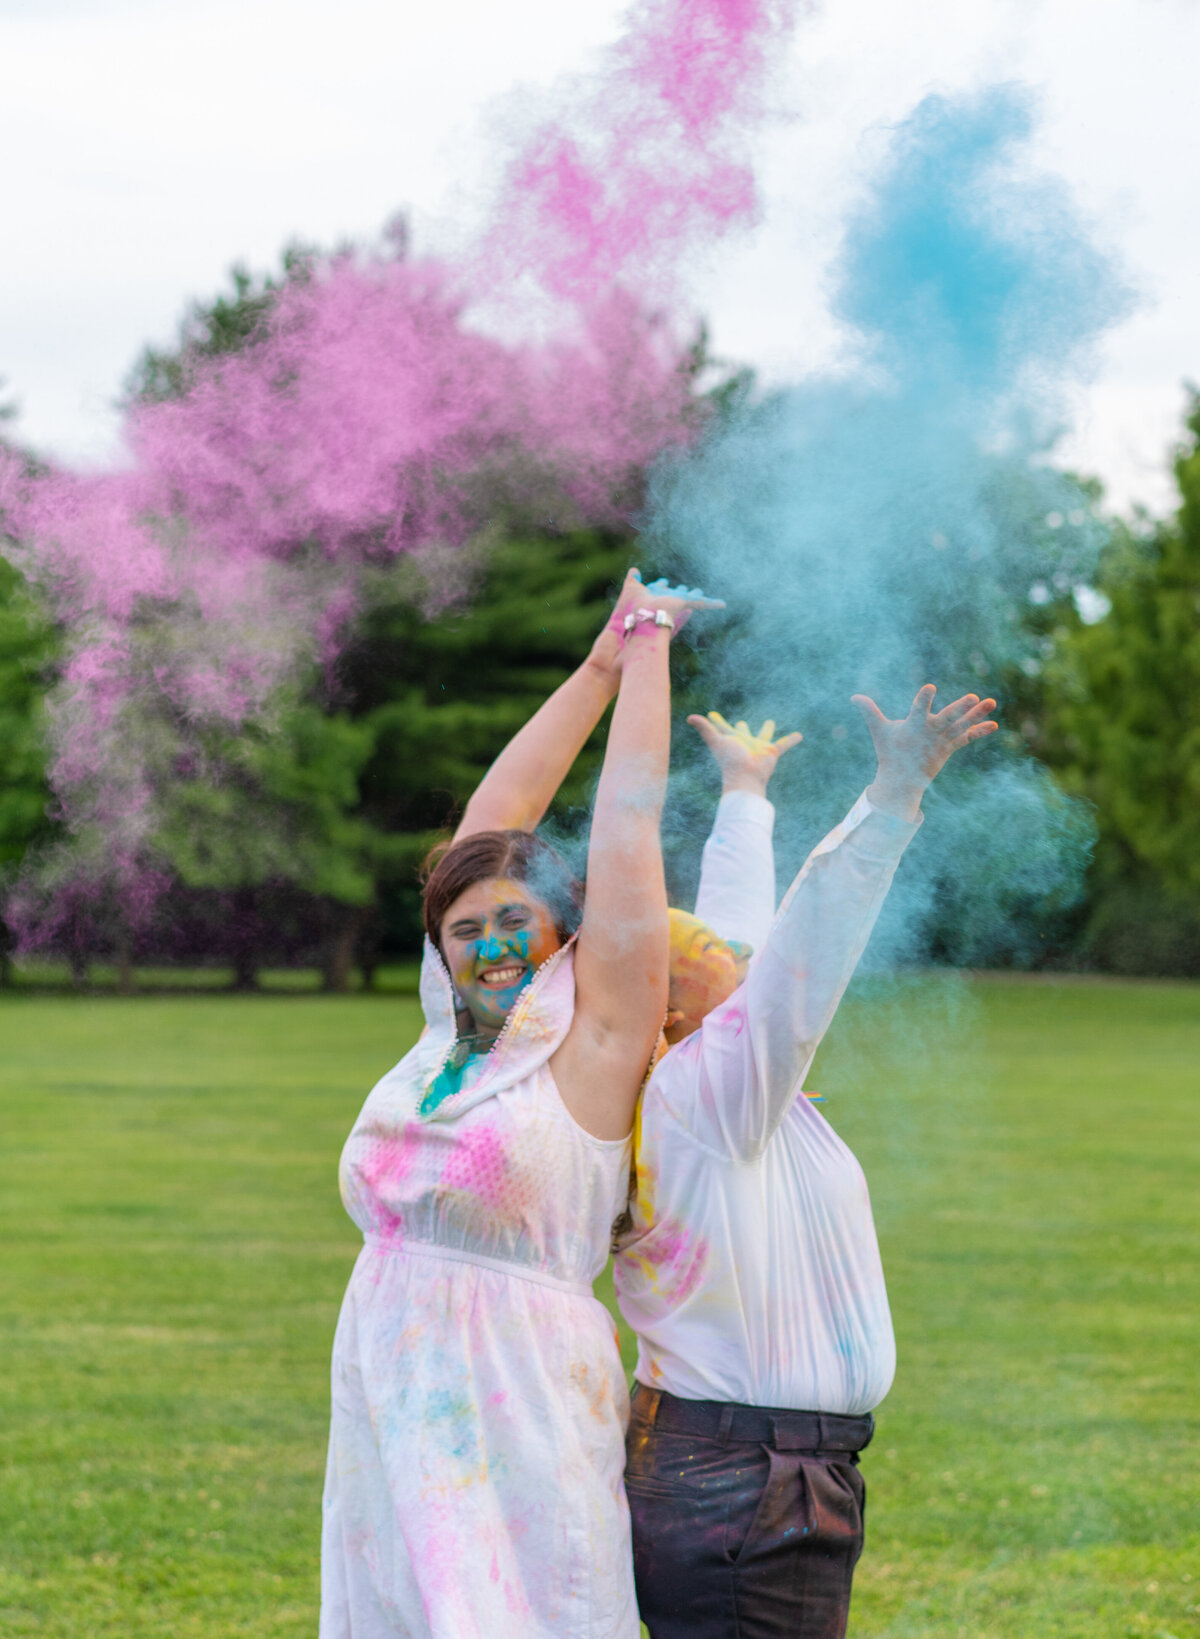 Ivalee and her fiancee, Kara, throwing up colored powder at the Columbus Park of Roses.